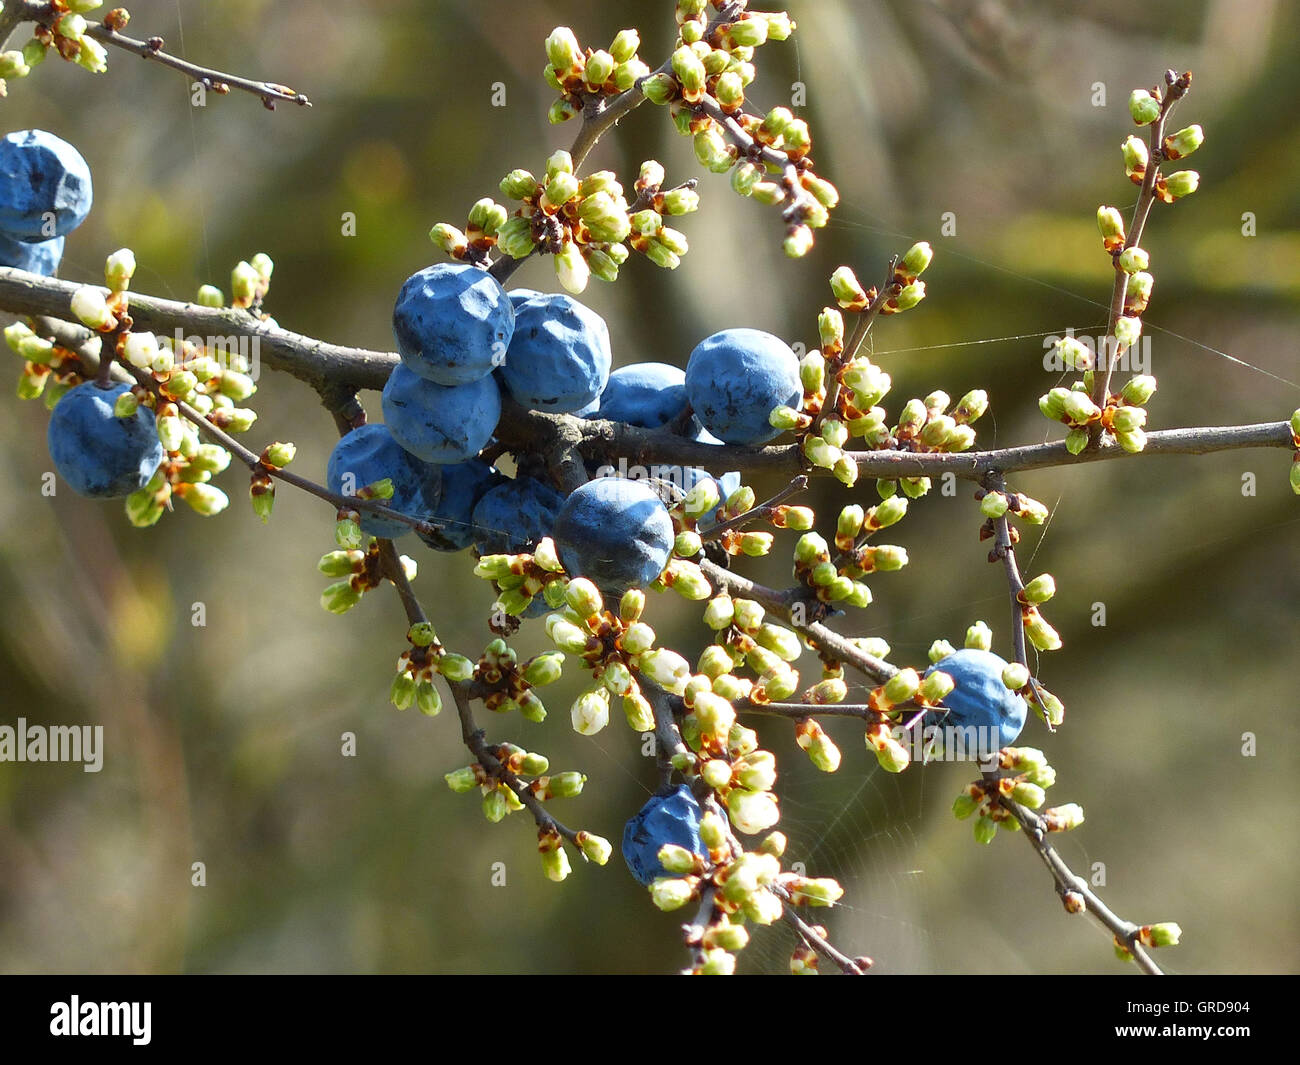 Sloes, Buds And Fruits The Same Time At The Blackthorn Bush Stock Photo